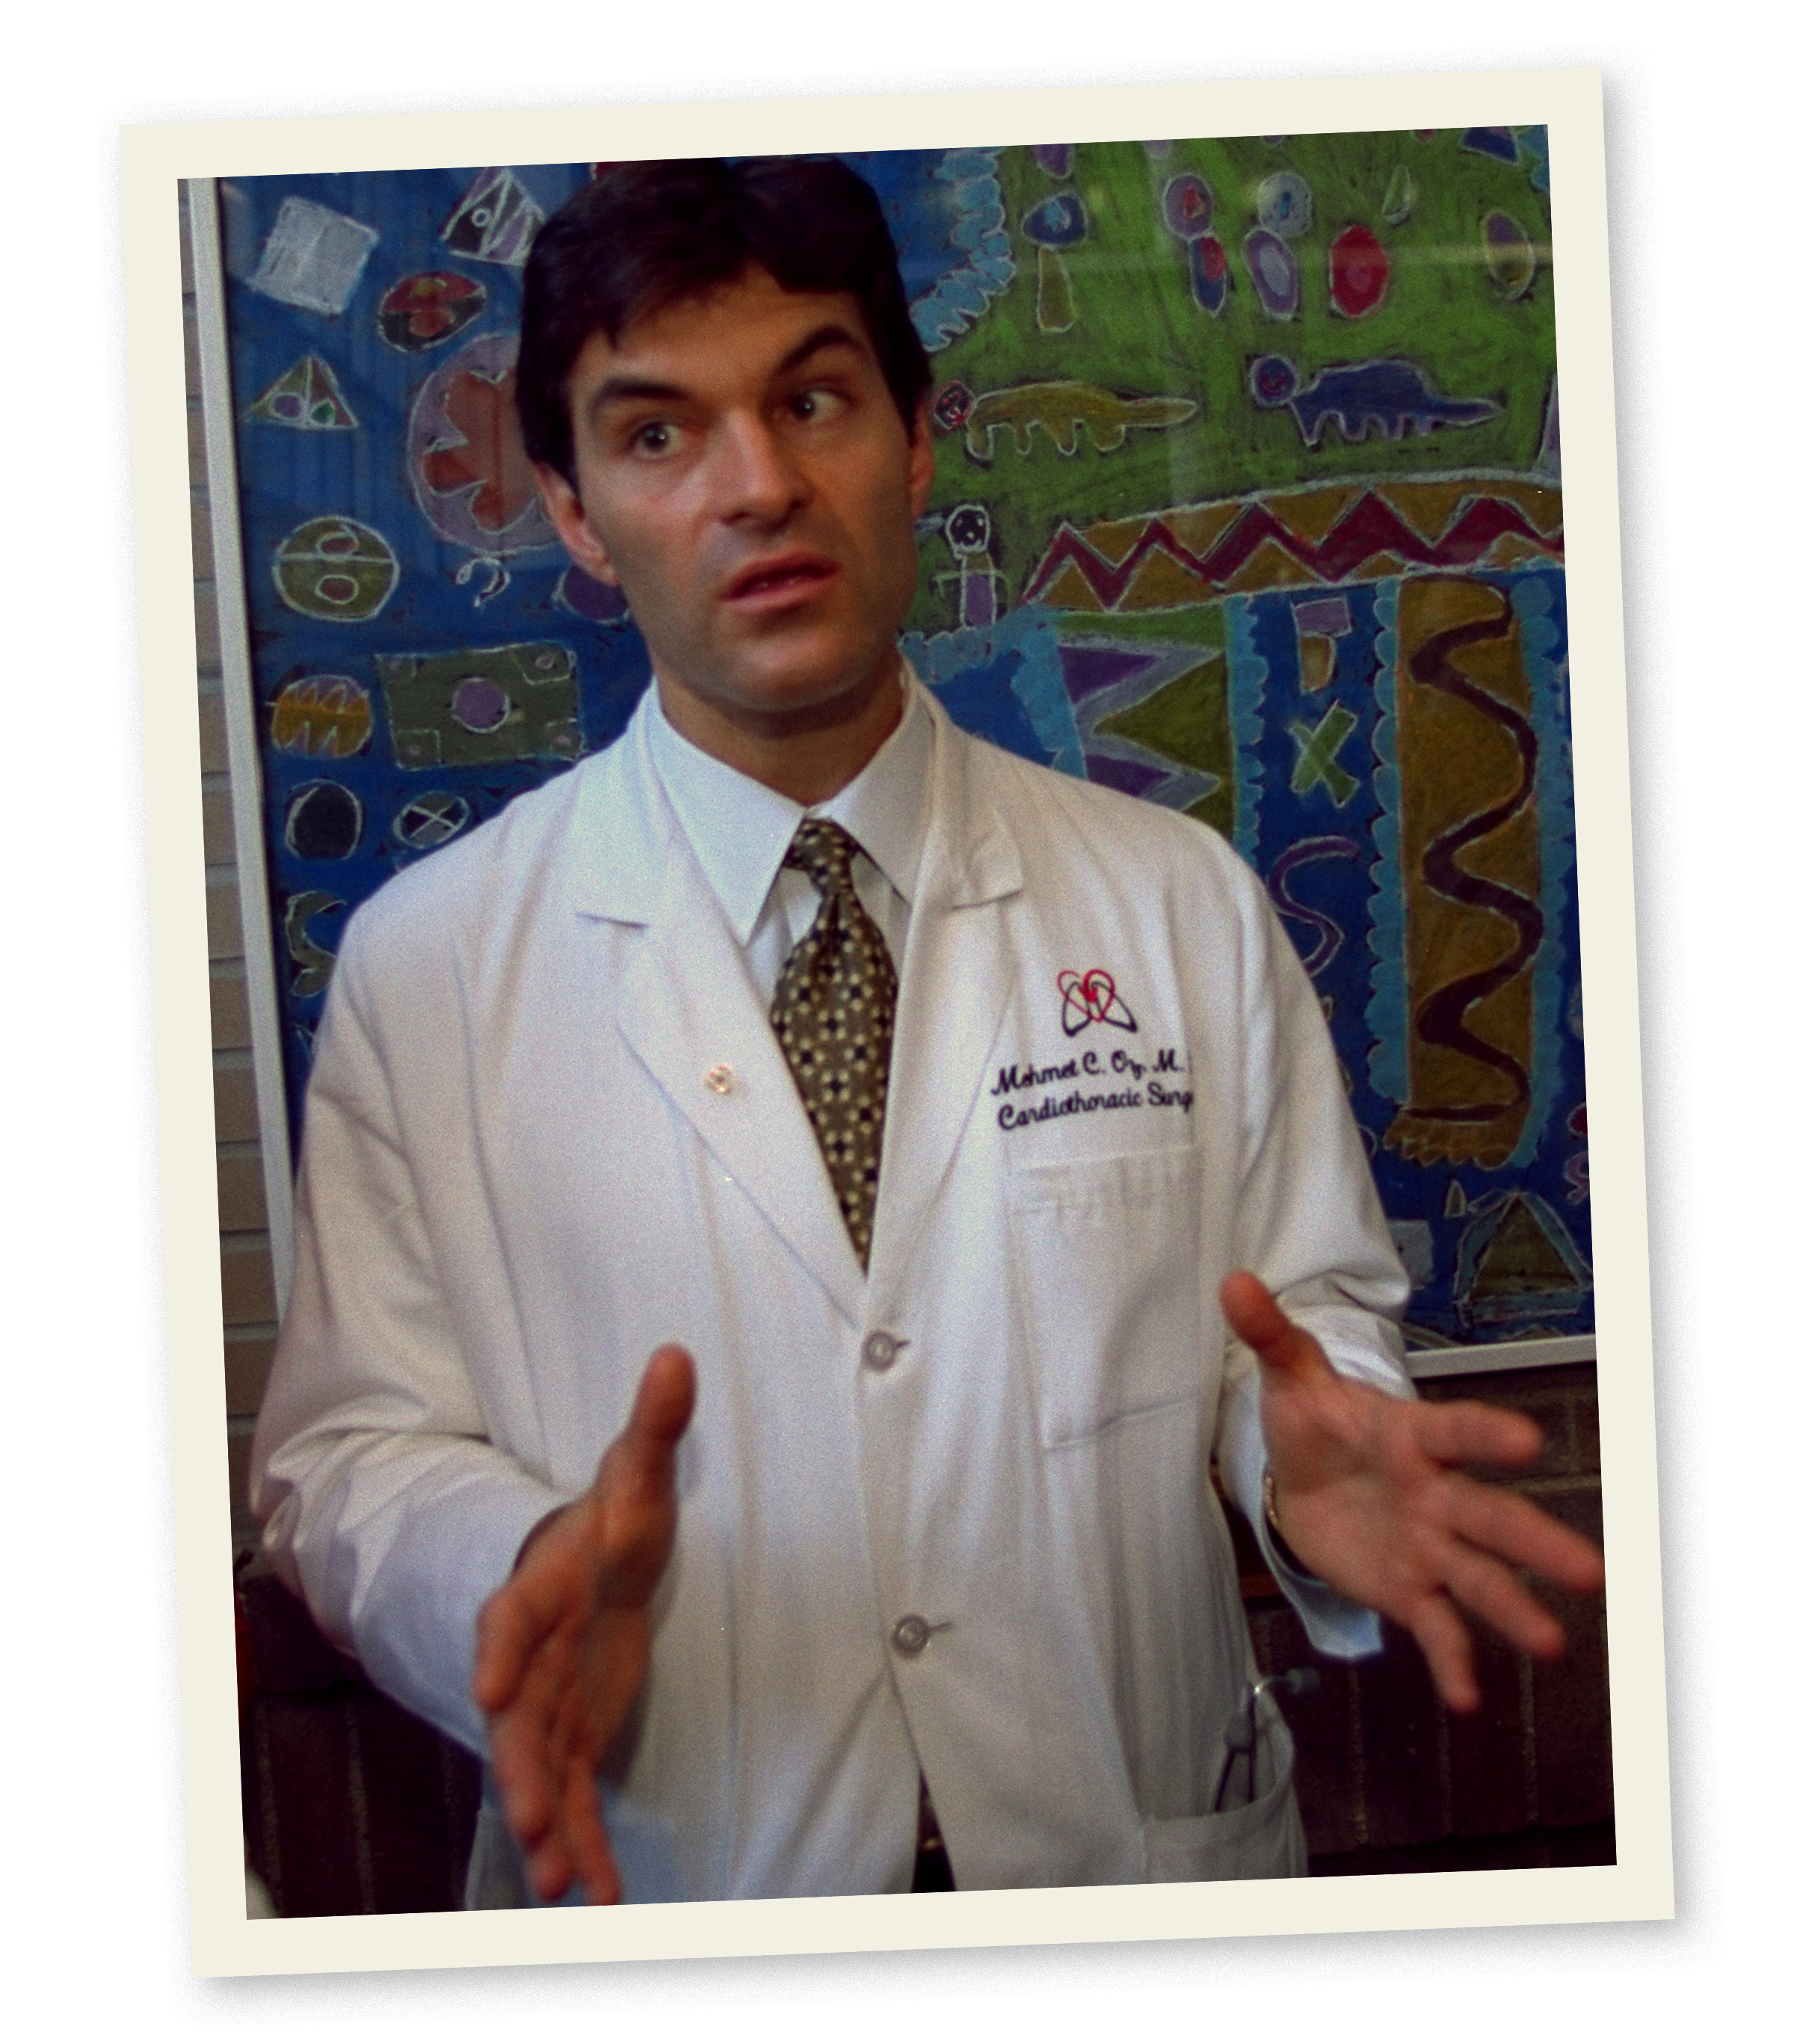 Dr Oz gestures with his hands in front of him while wearing a white doctor&#x27;s jacket and standing in front of a wall with simple children&#x27;s illustrations